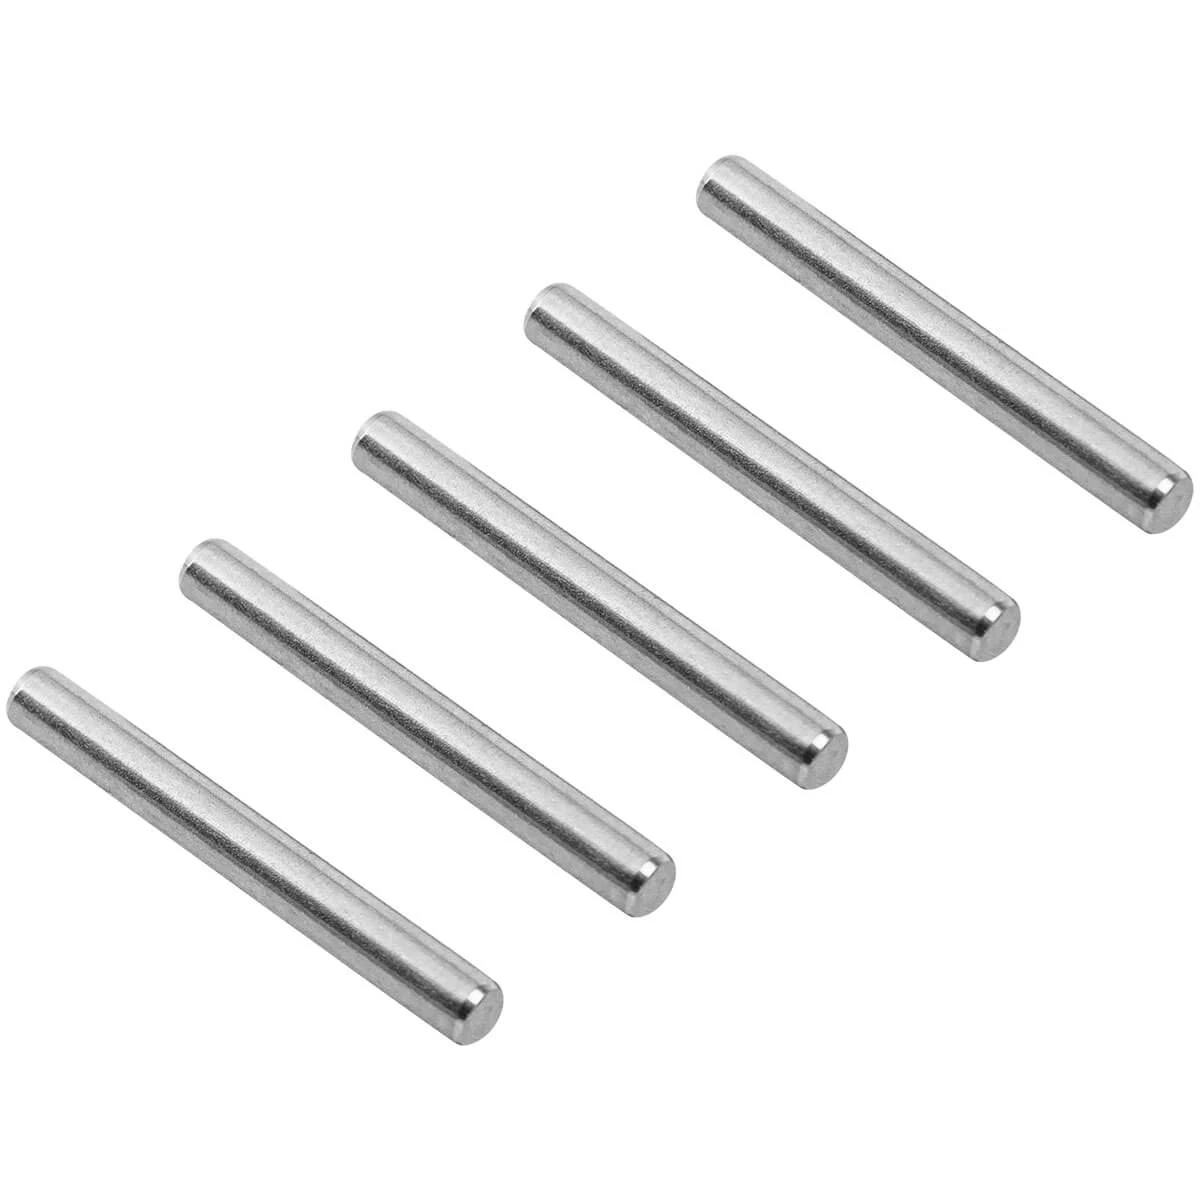 Replacement Prop Pins - 5 Pack